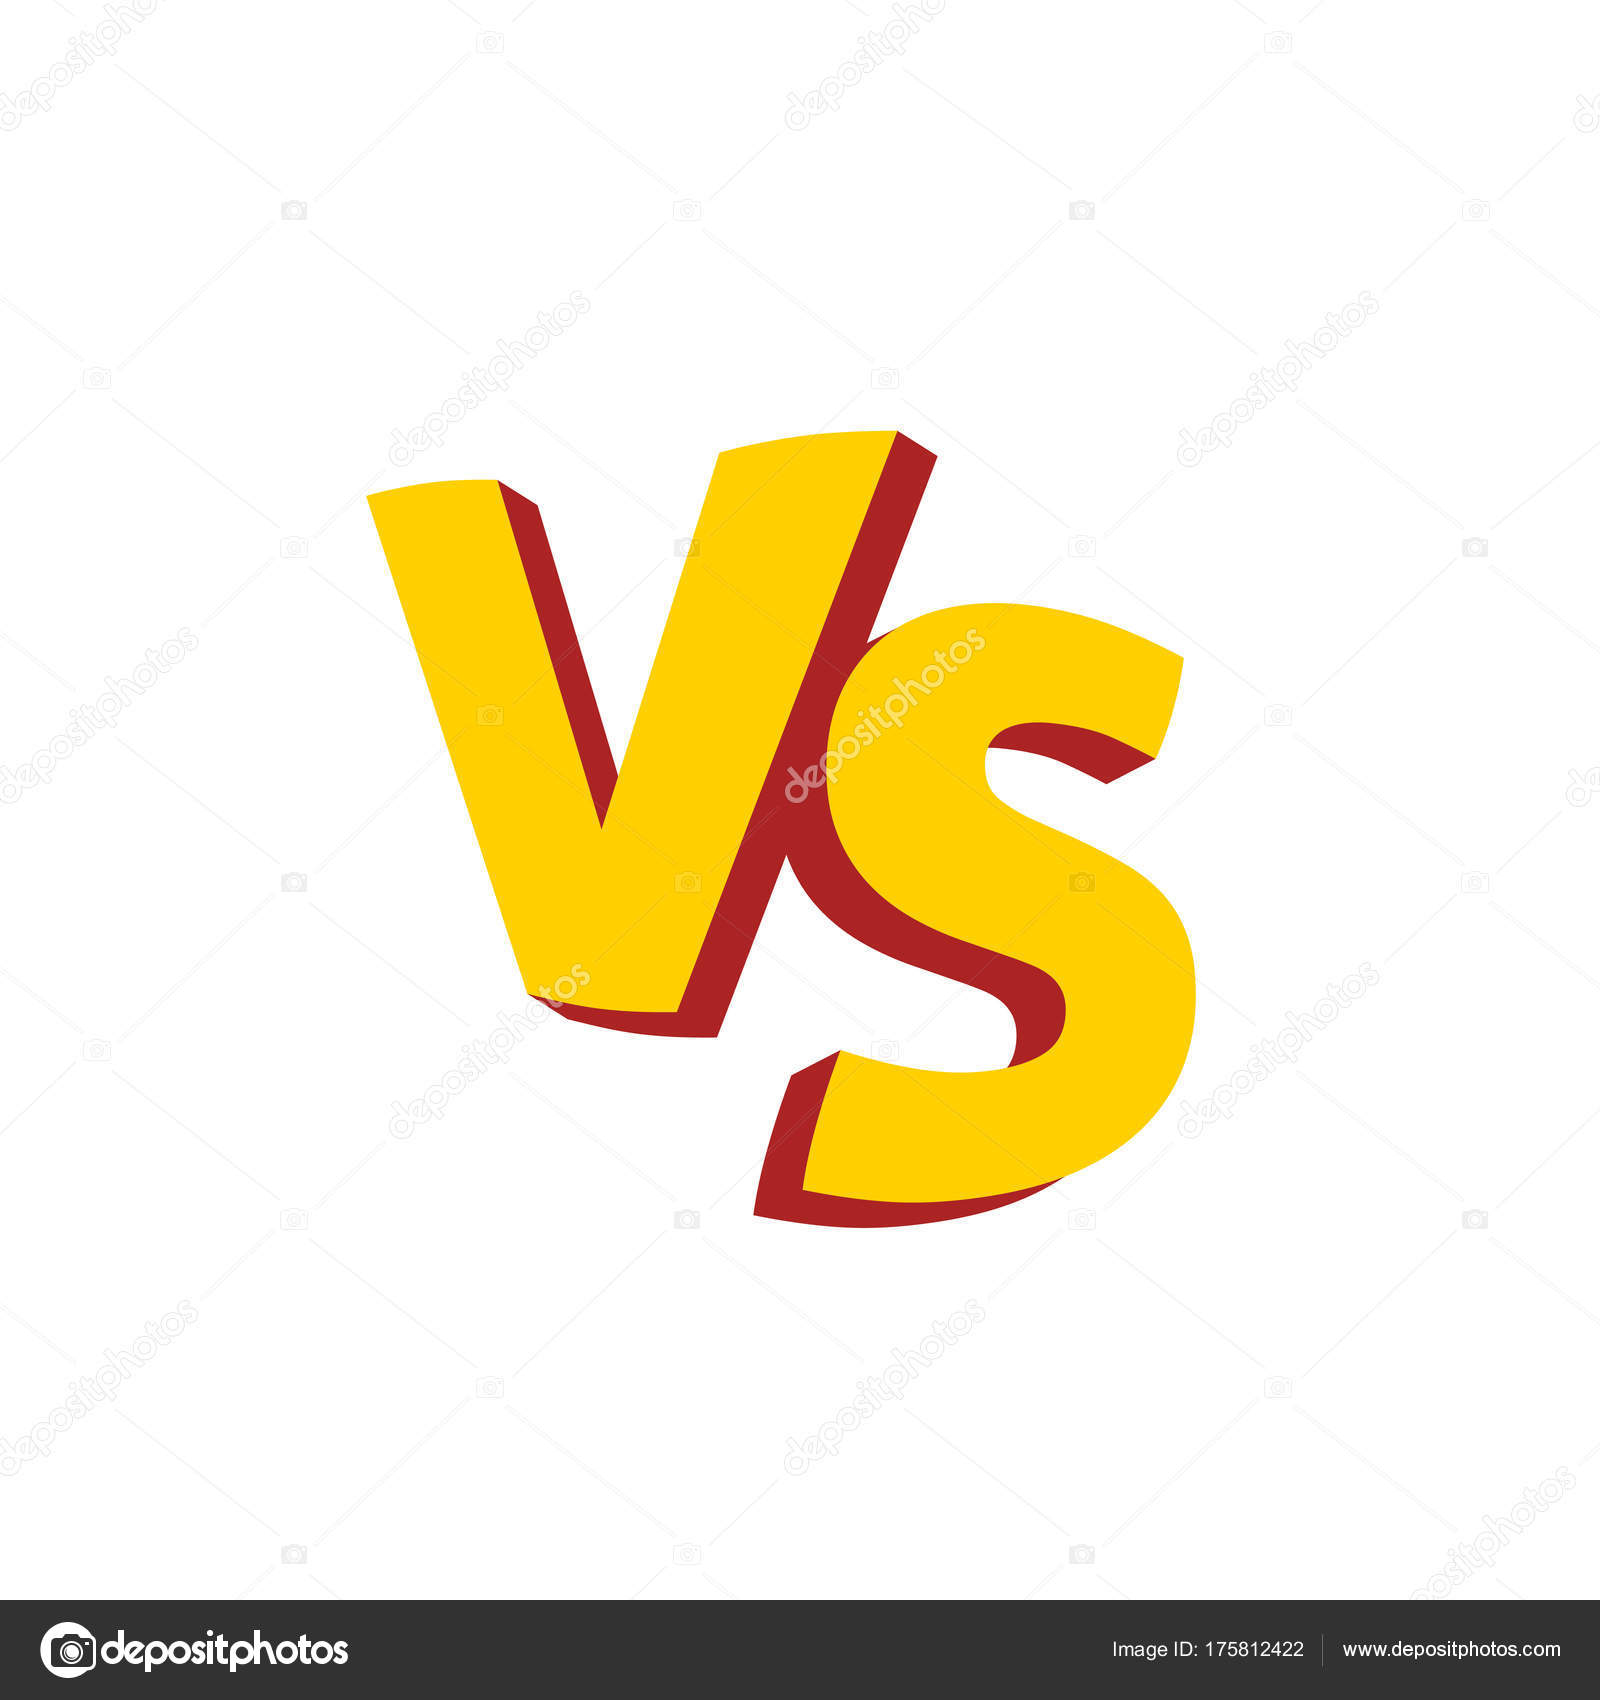 vs-versus-letters-vector-logo-isolated-on-transparent-background-vs